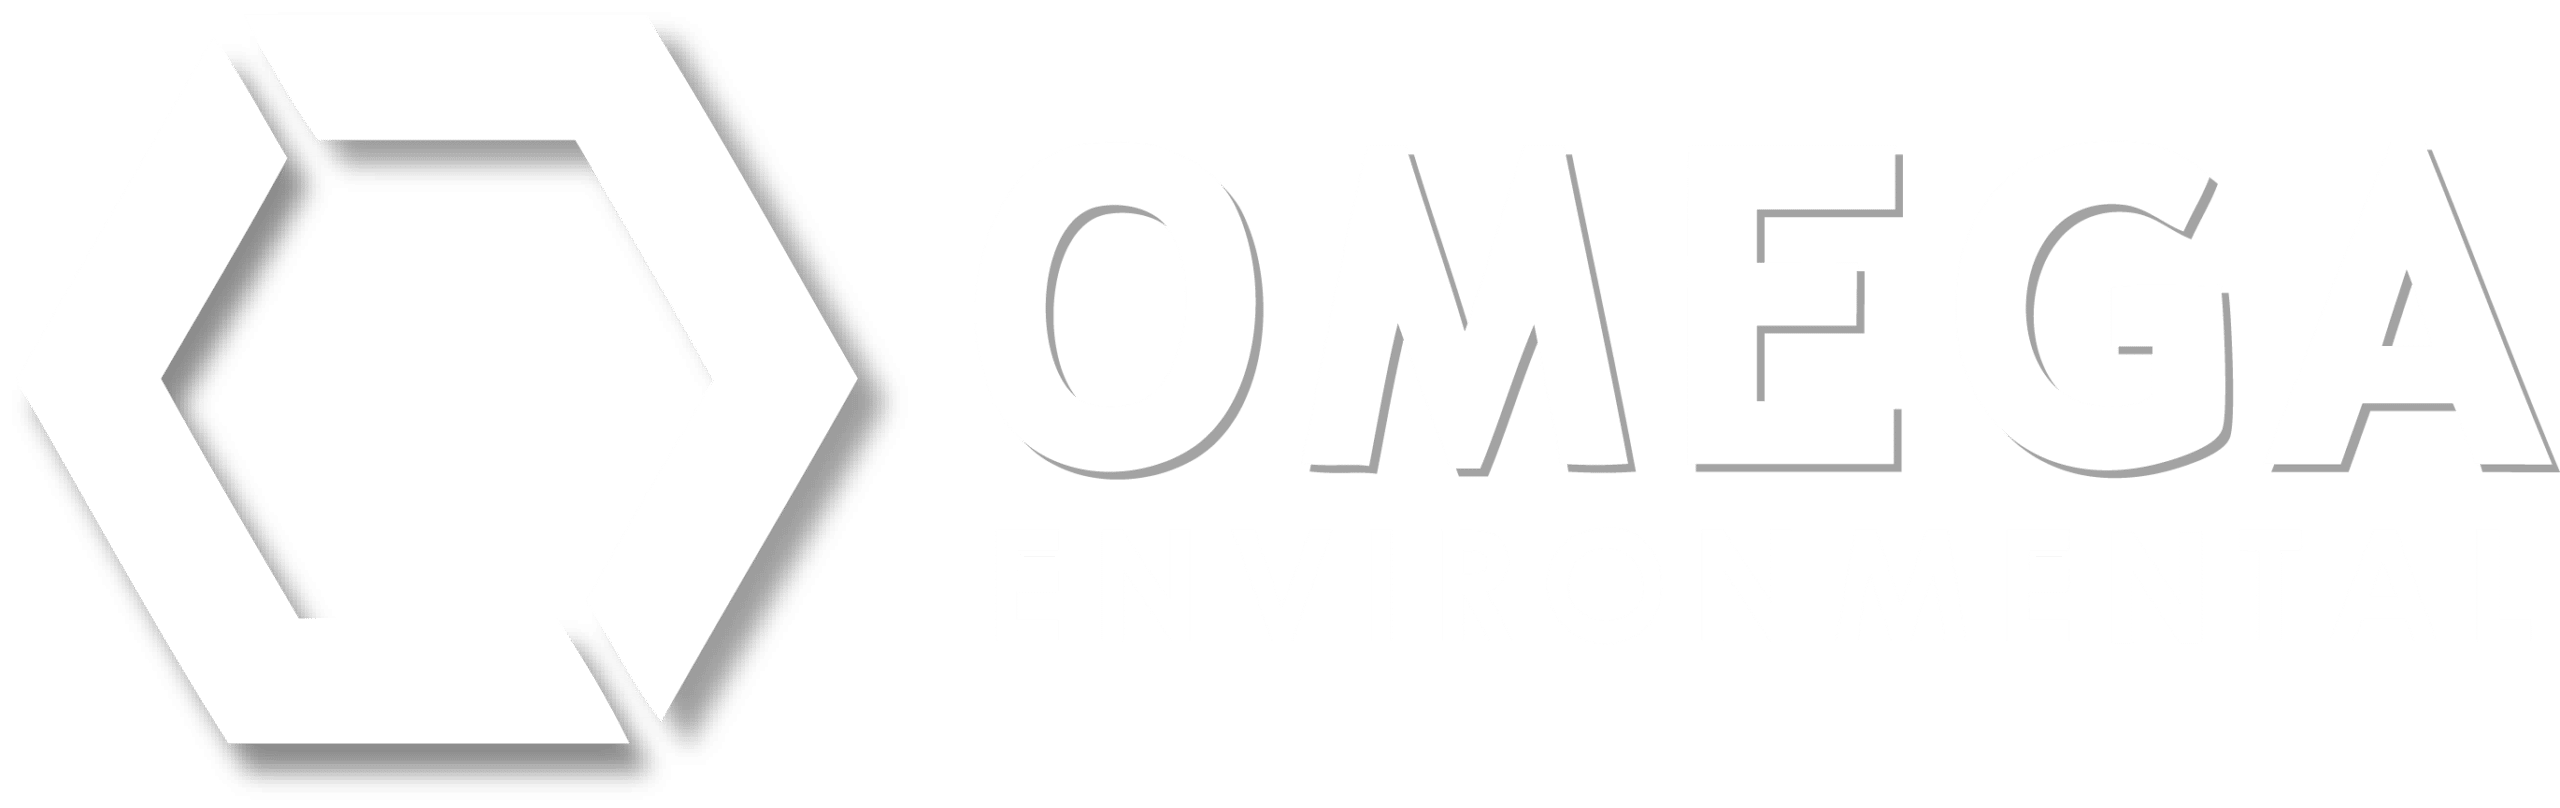 Environmental Consulting Firm and Remediation Services